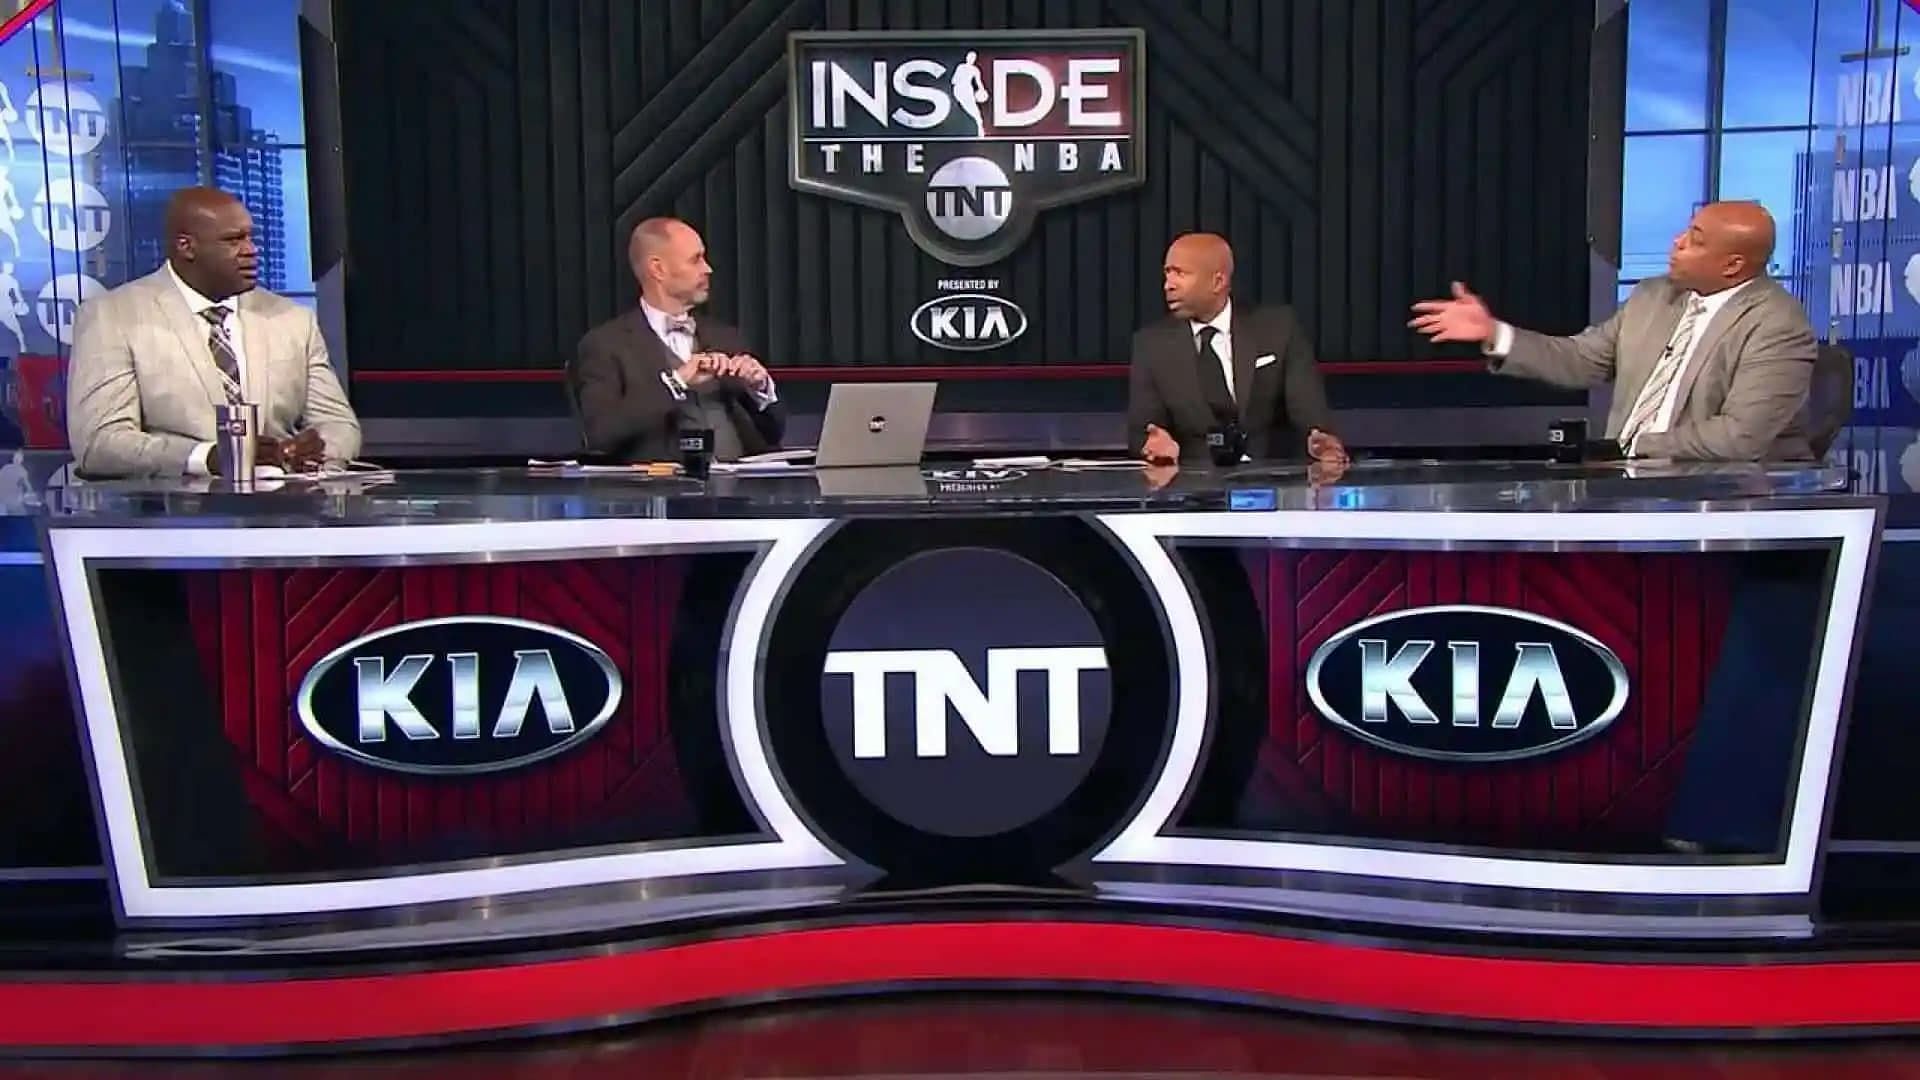 The Inside the NBA crew of Shaquille O